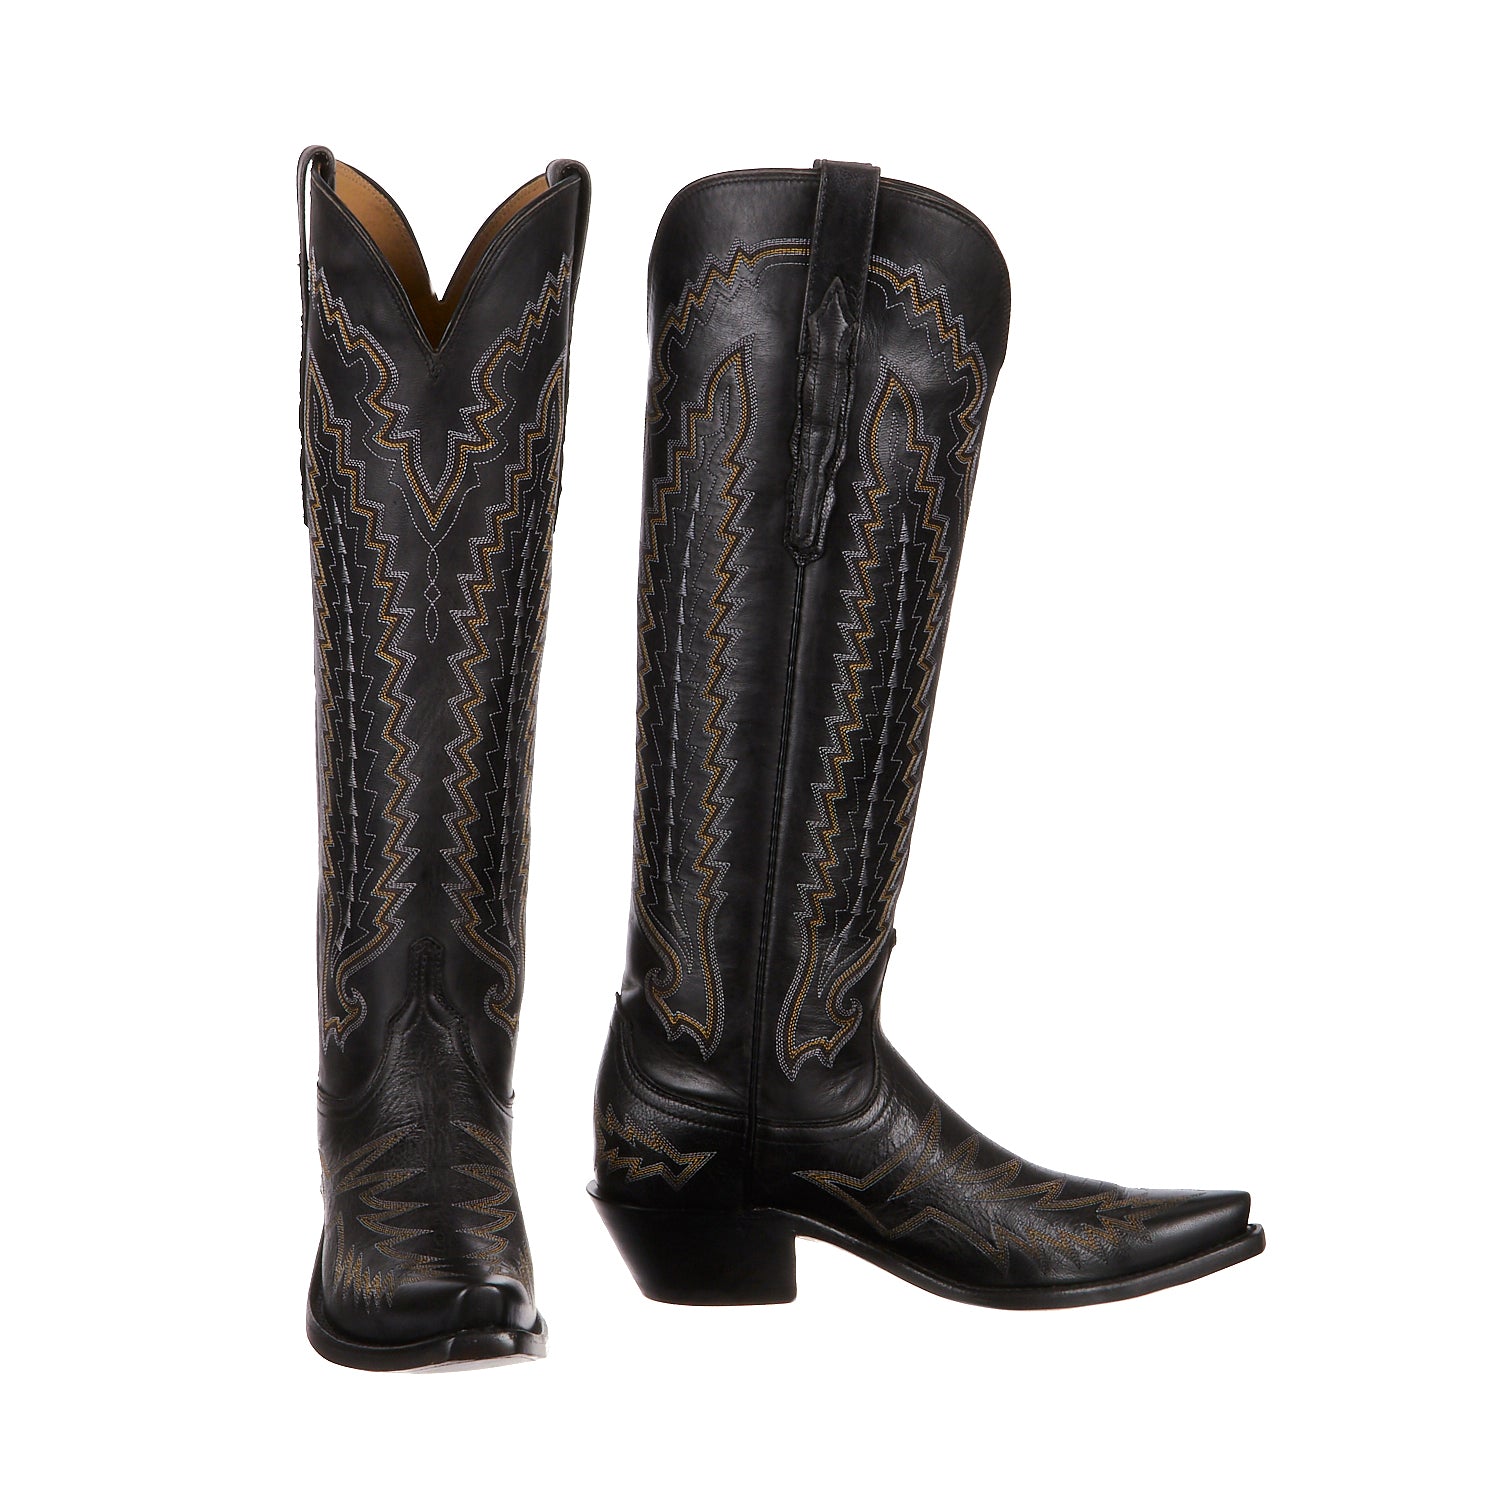 Shop All Womens Boots - Lucchese